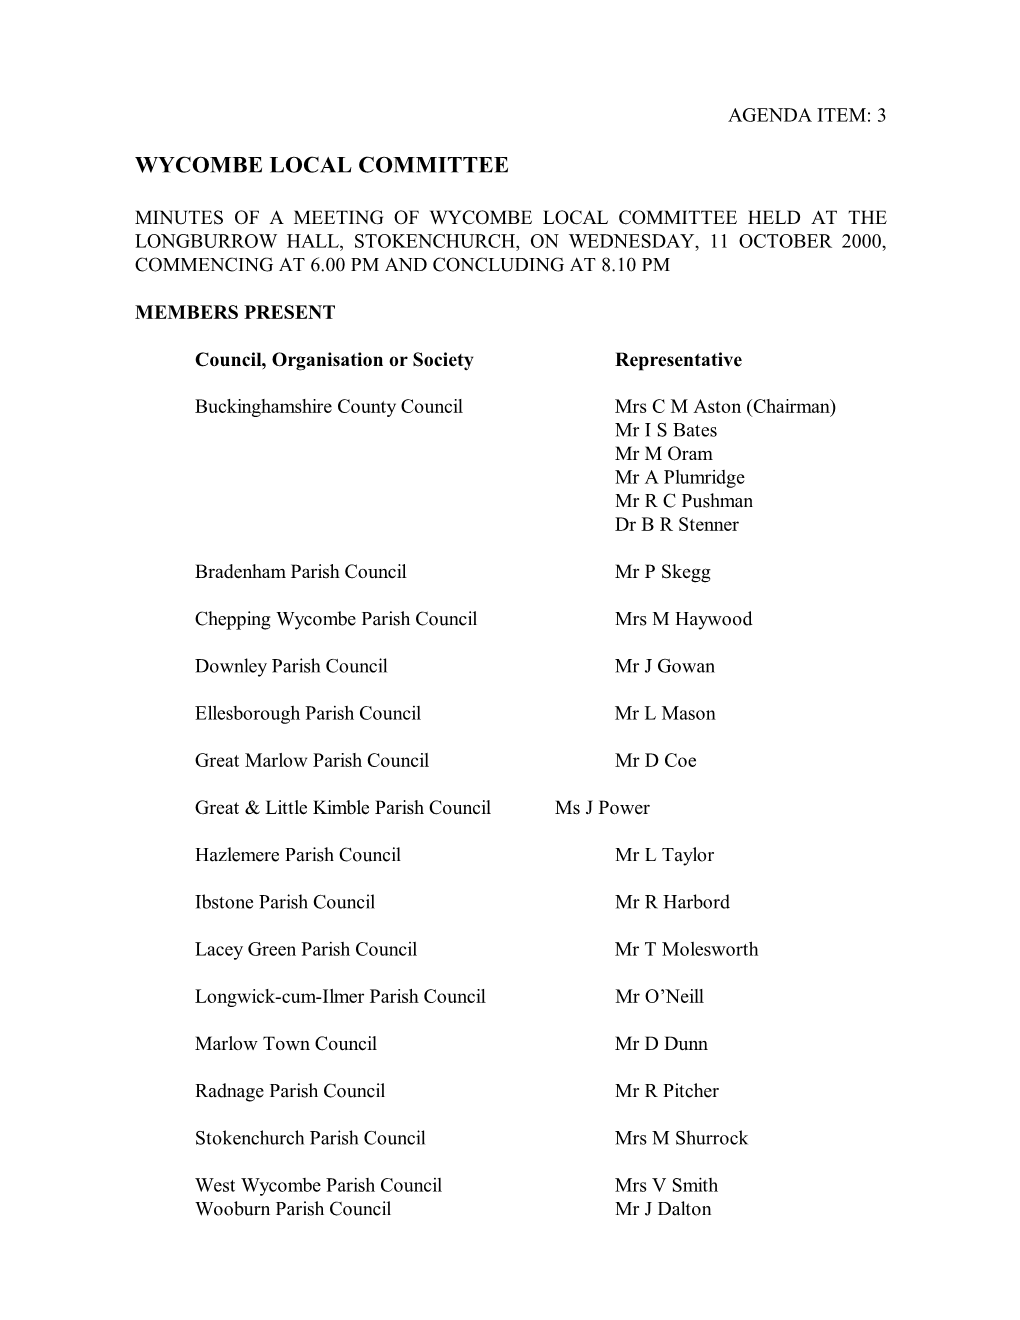 Wycombe Local Committee Minutes 11 October 2000